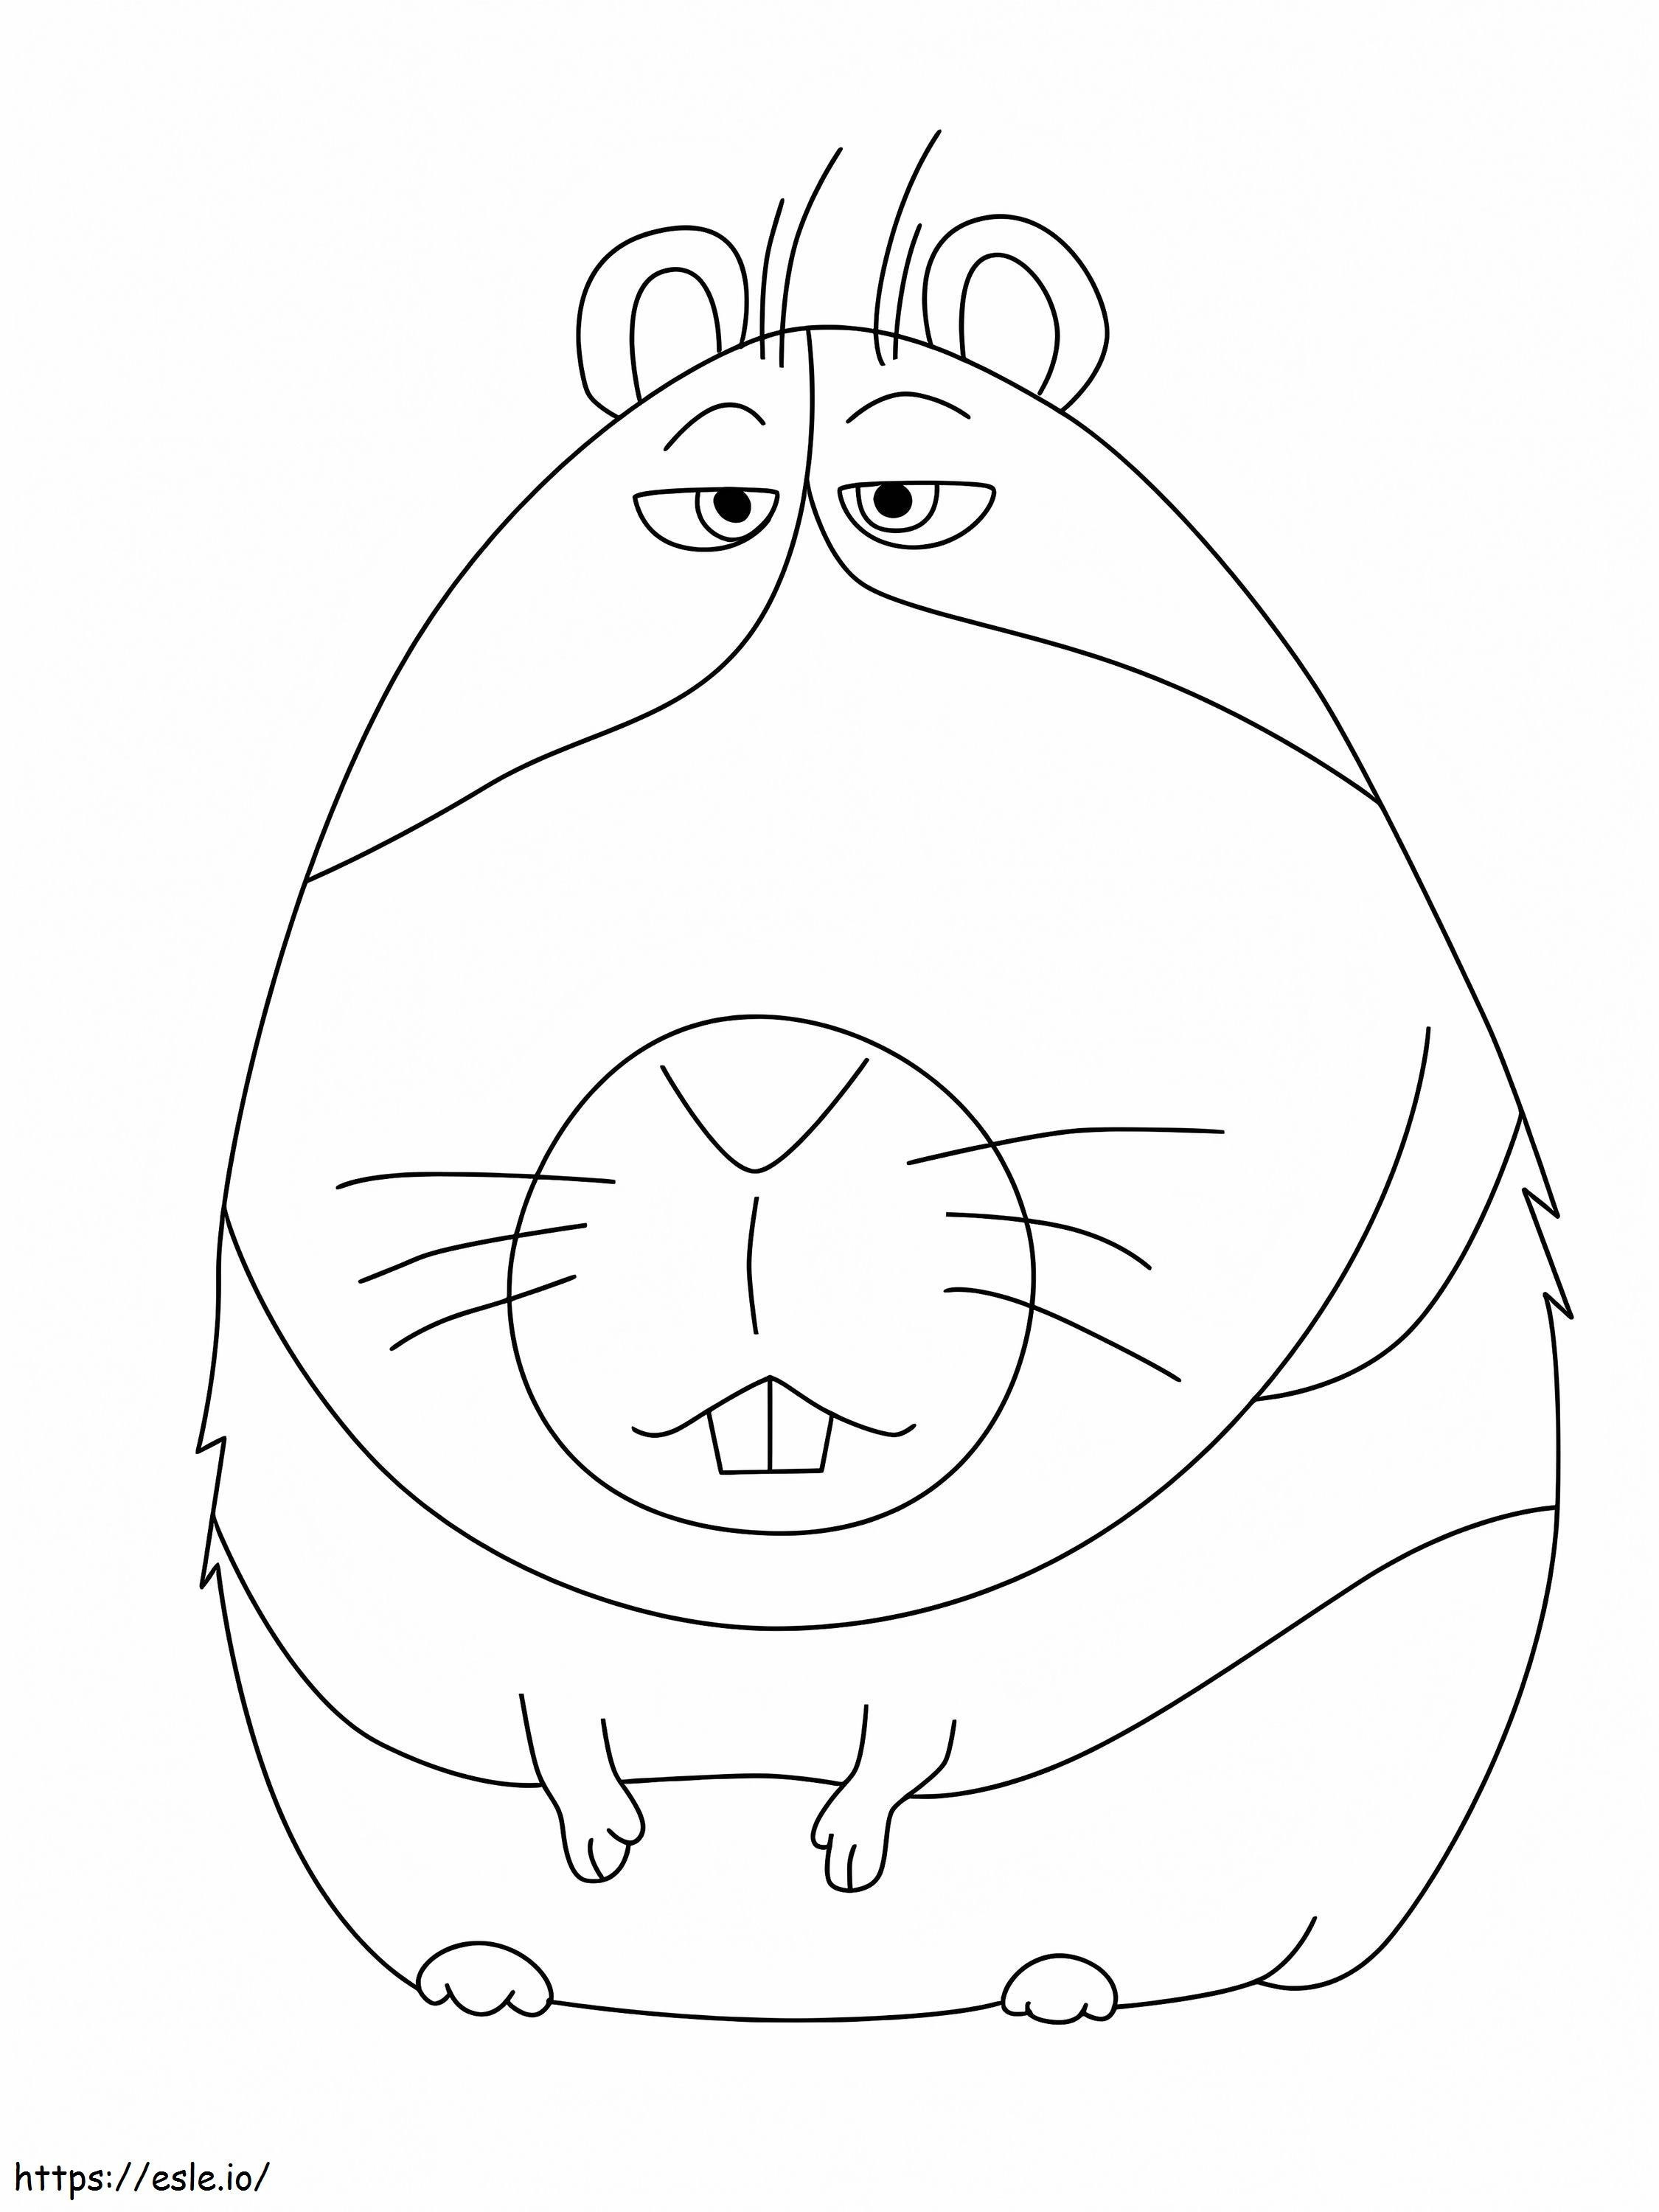 1559695675 Norman A4 coloring page